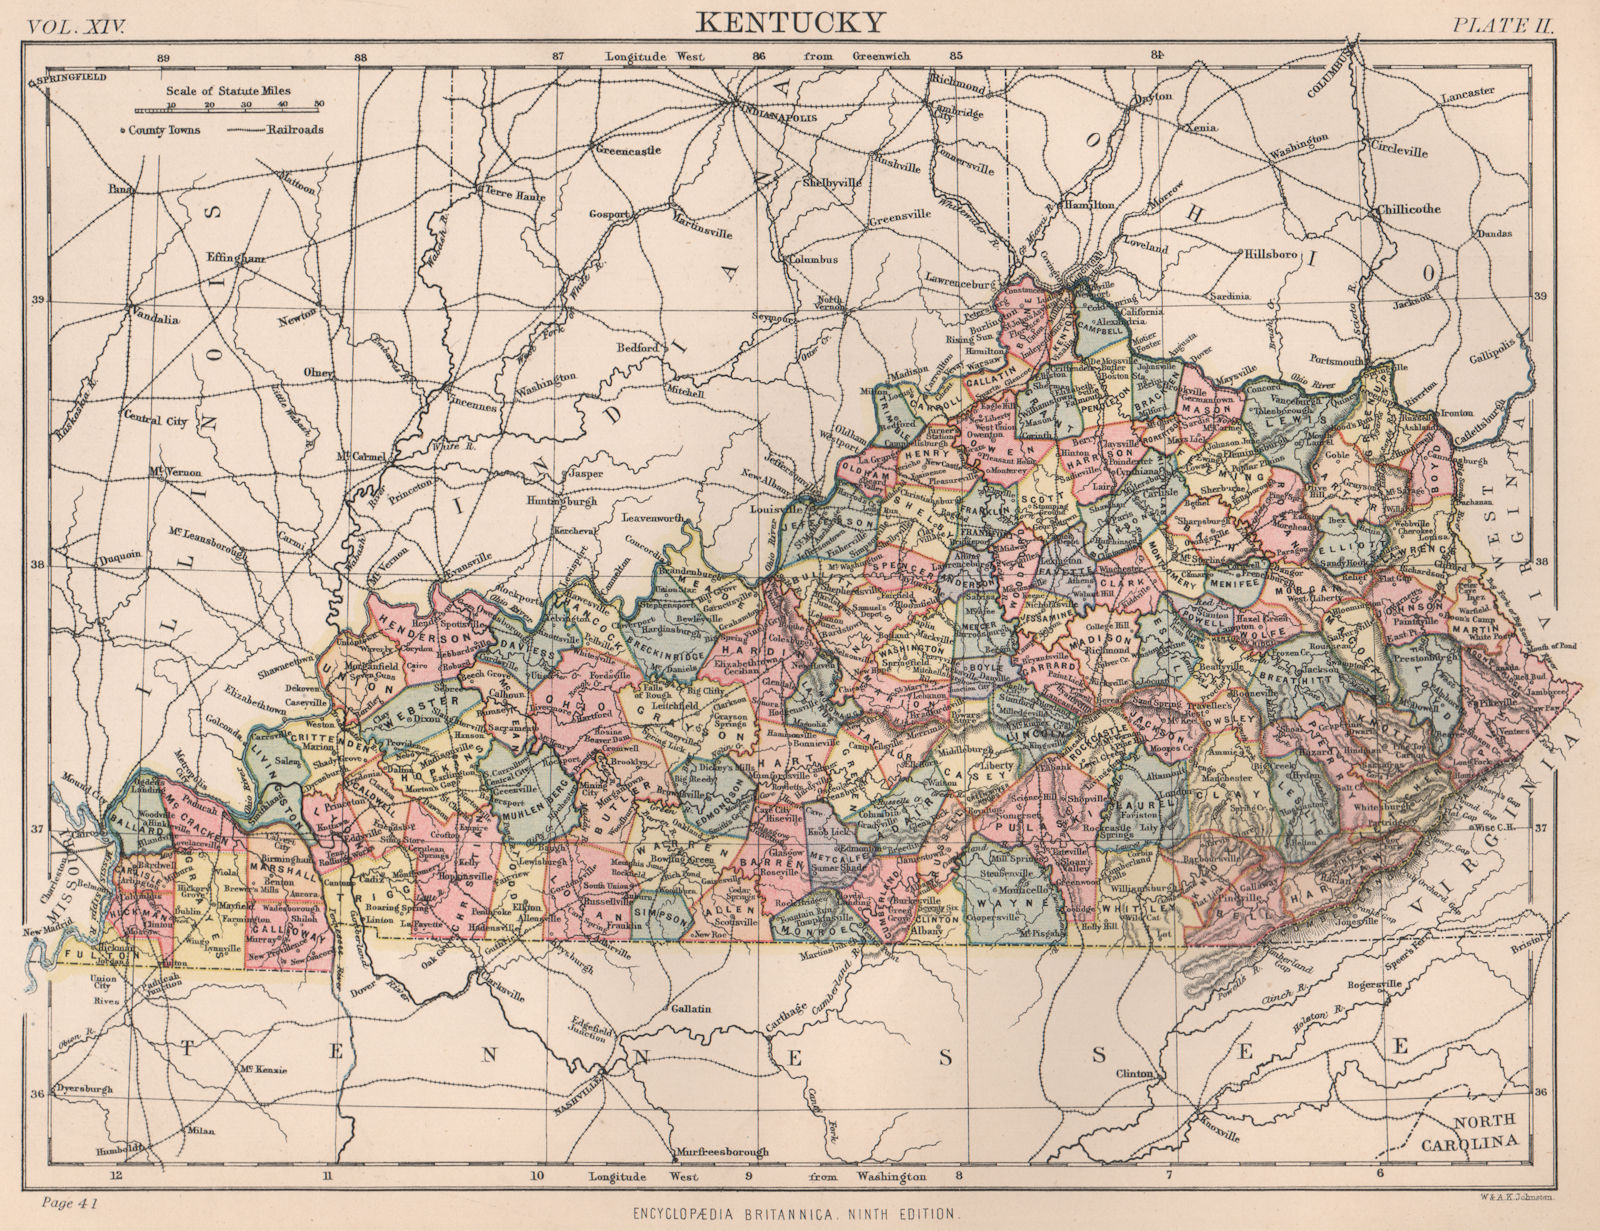 Associate Product KENTUCKY state map. Counties. BRITANNICA 1898 old antique plan chart